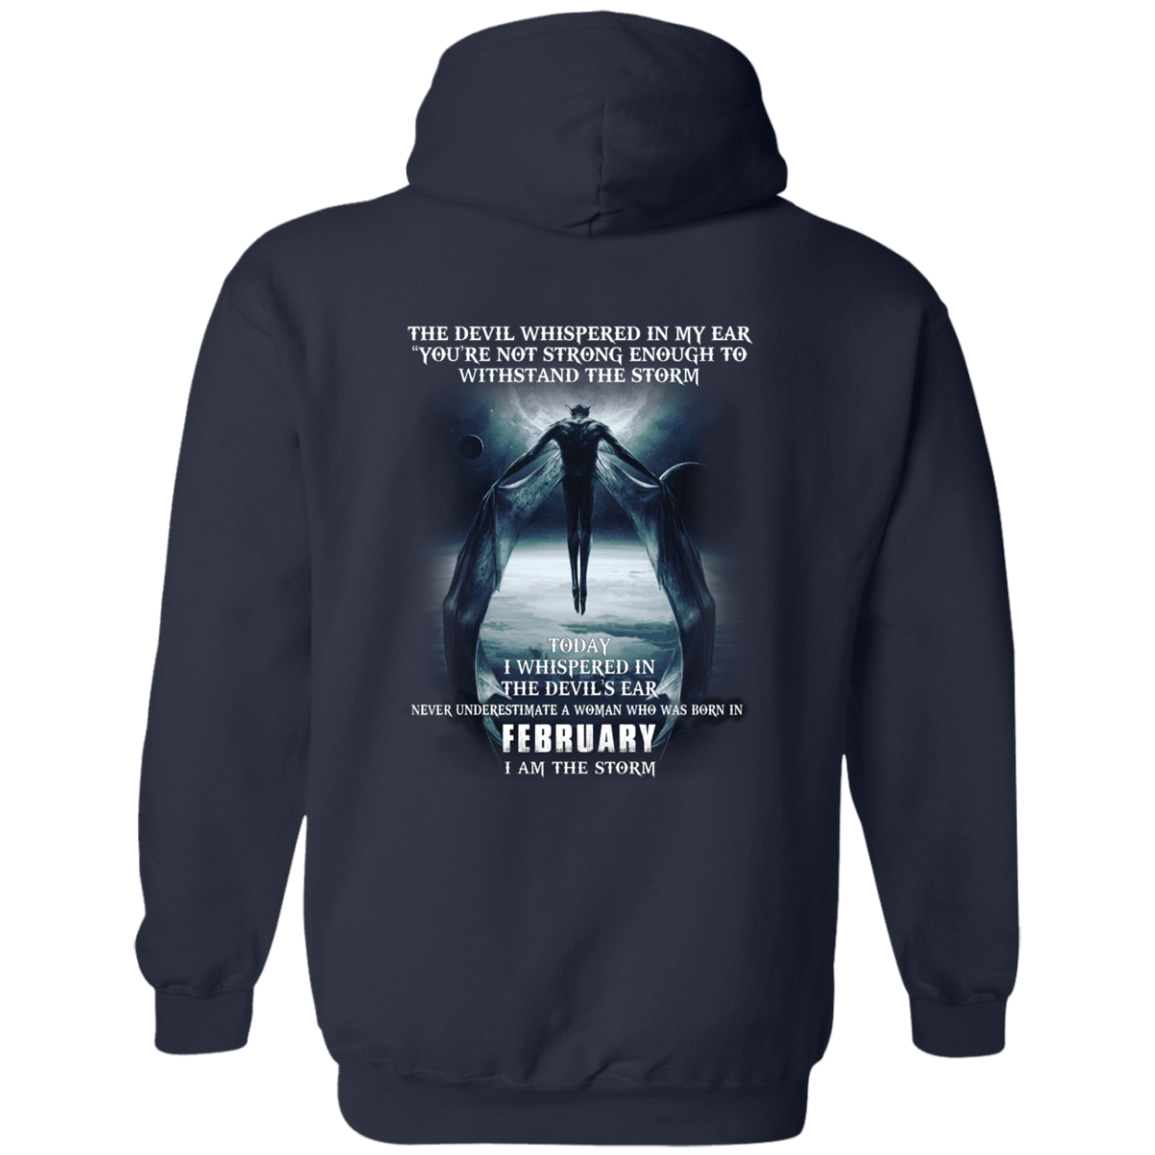 The devil whispered in my ear, a woman was born in February shirt, hoo